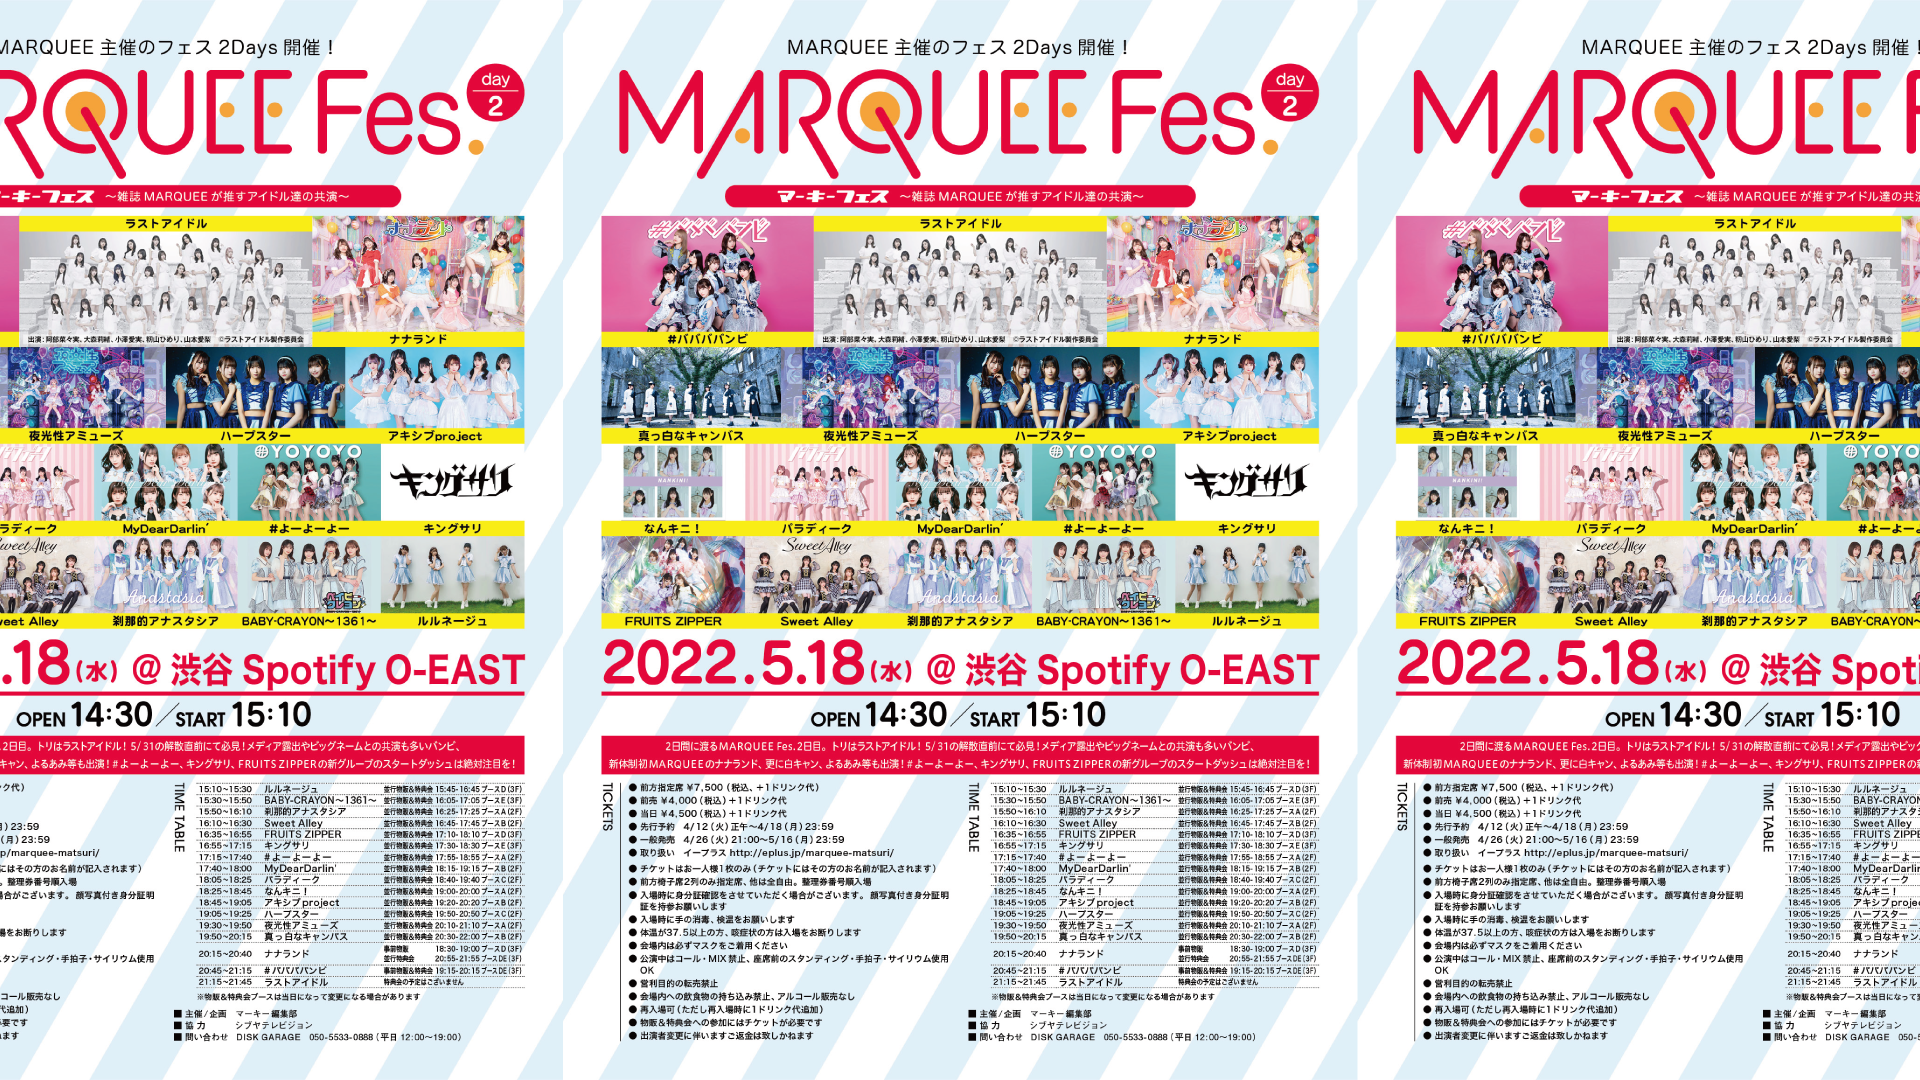 MARQUEE Fes.